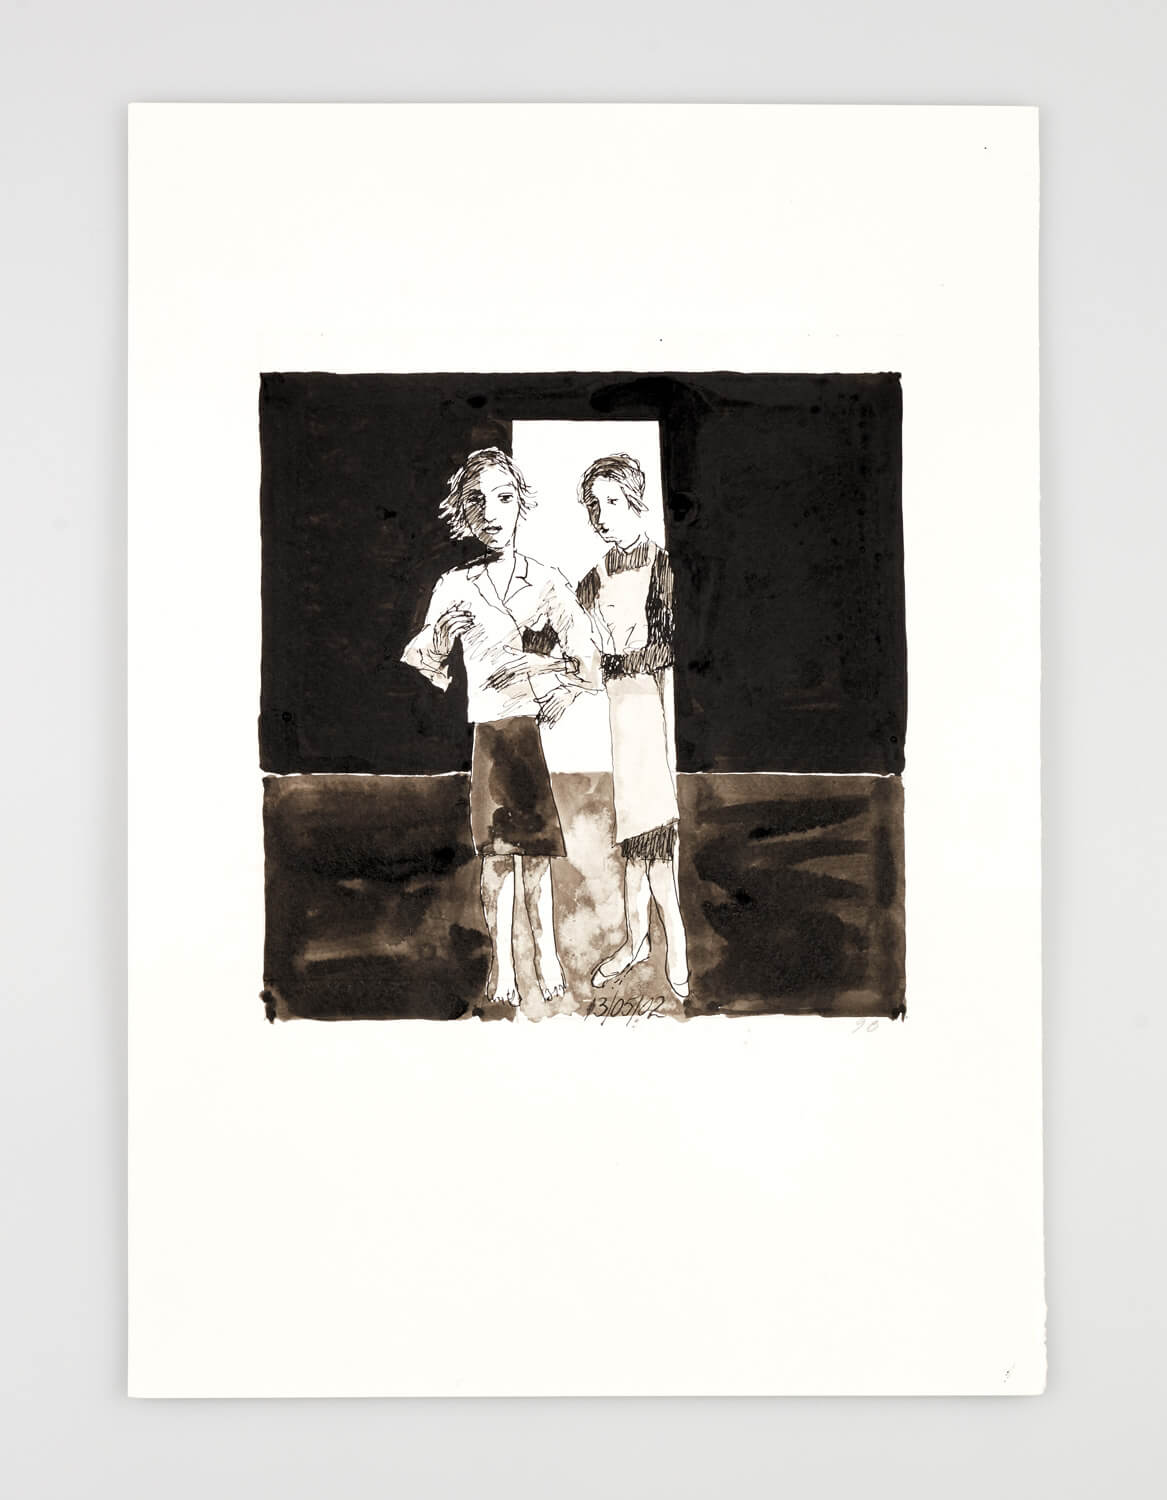 JB070 - Two Women - You look perfect - 2002 - 50 x 35 cm - Indian ink and wash on pape